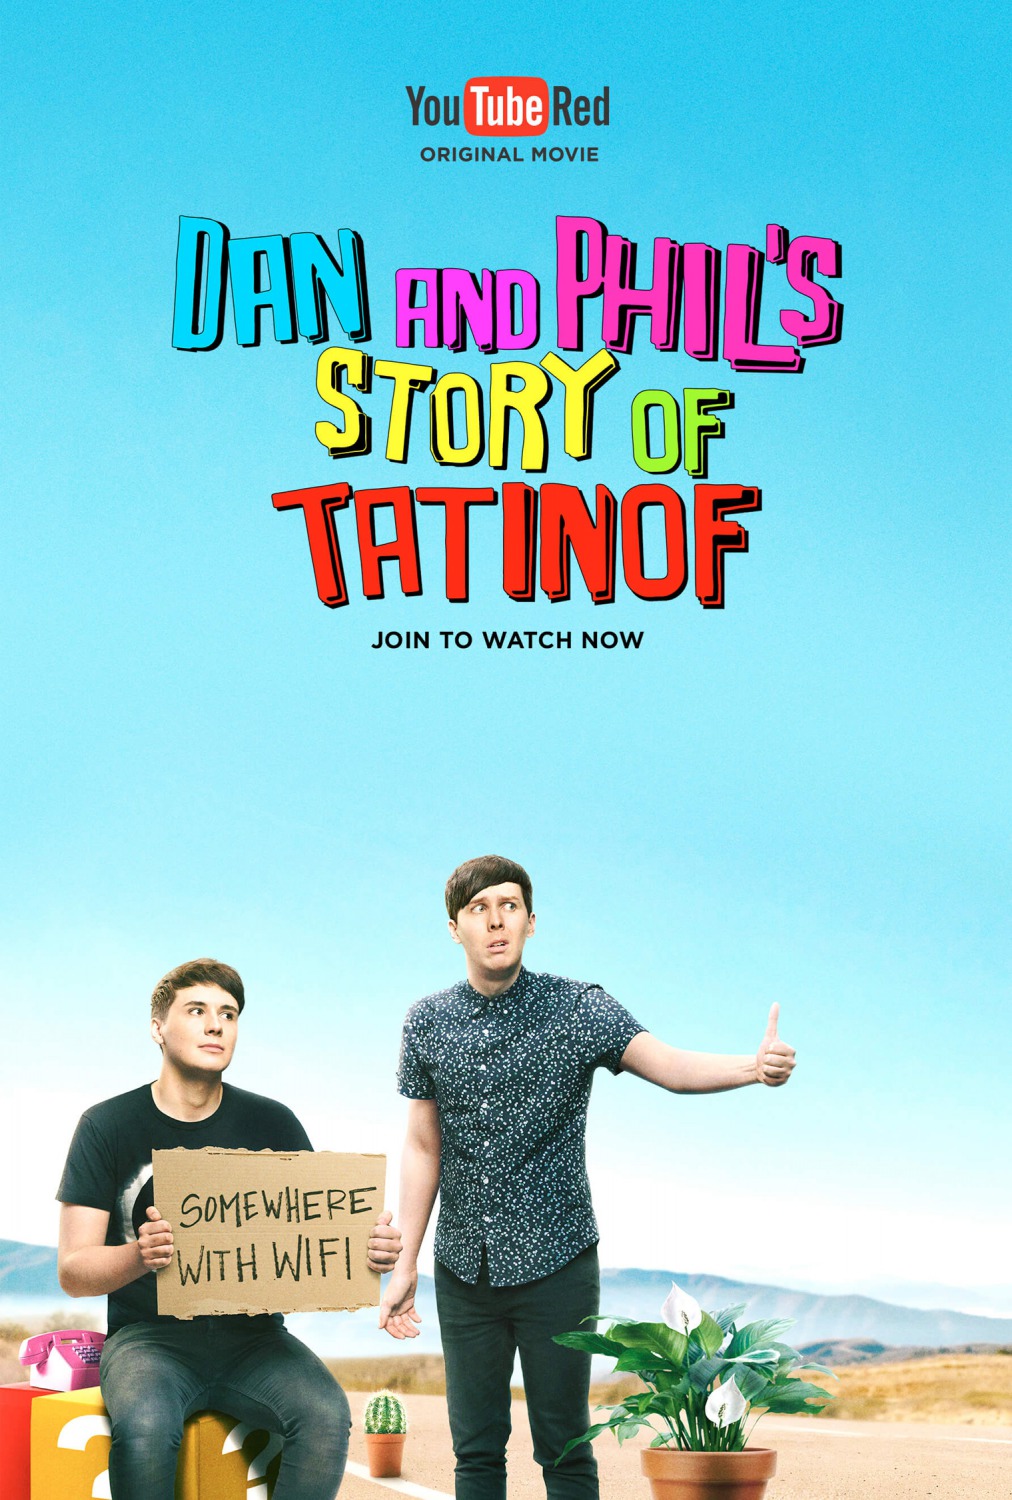 Extra Large Movie Poster Image for Dan and Phil's Story of TATINOF (#1 of 2)